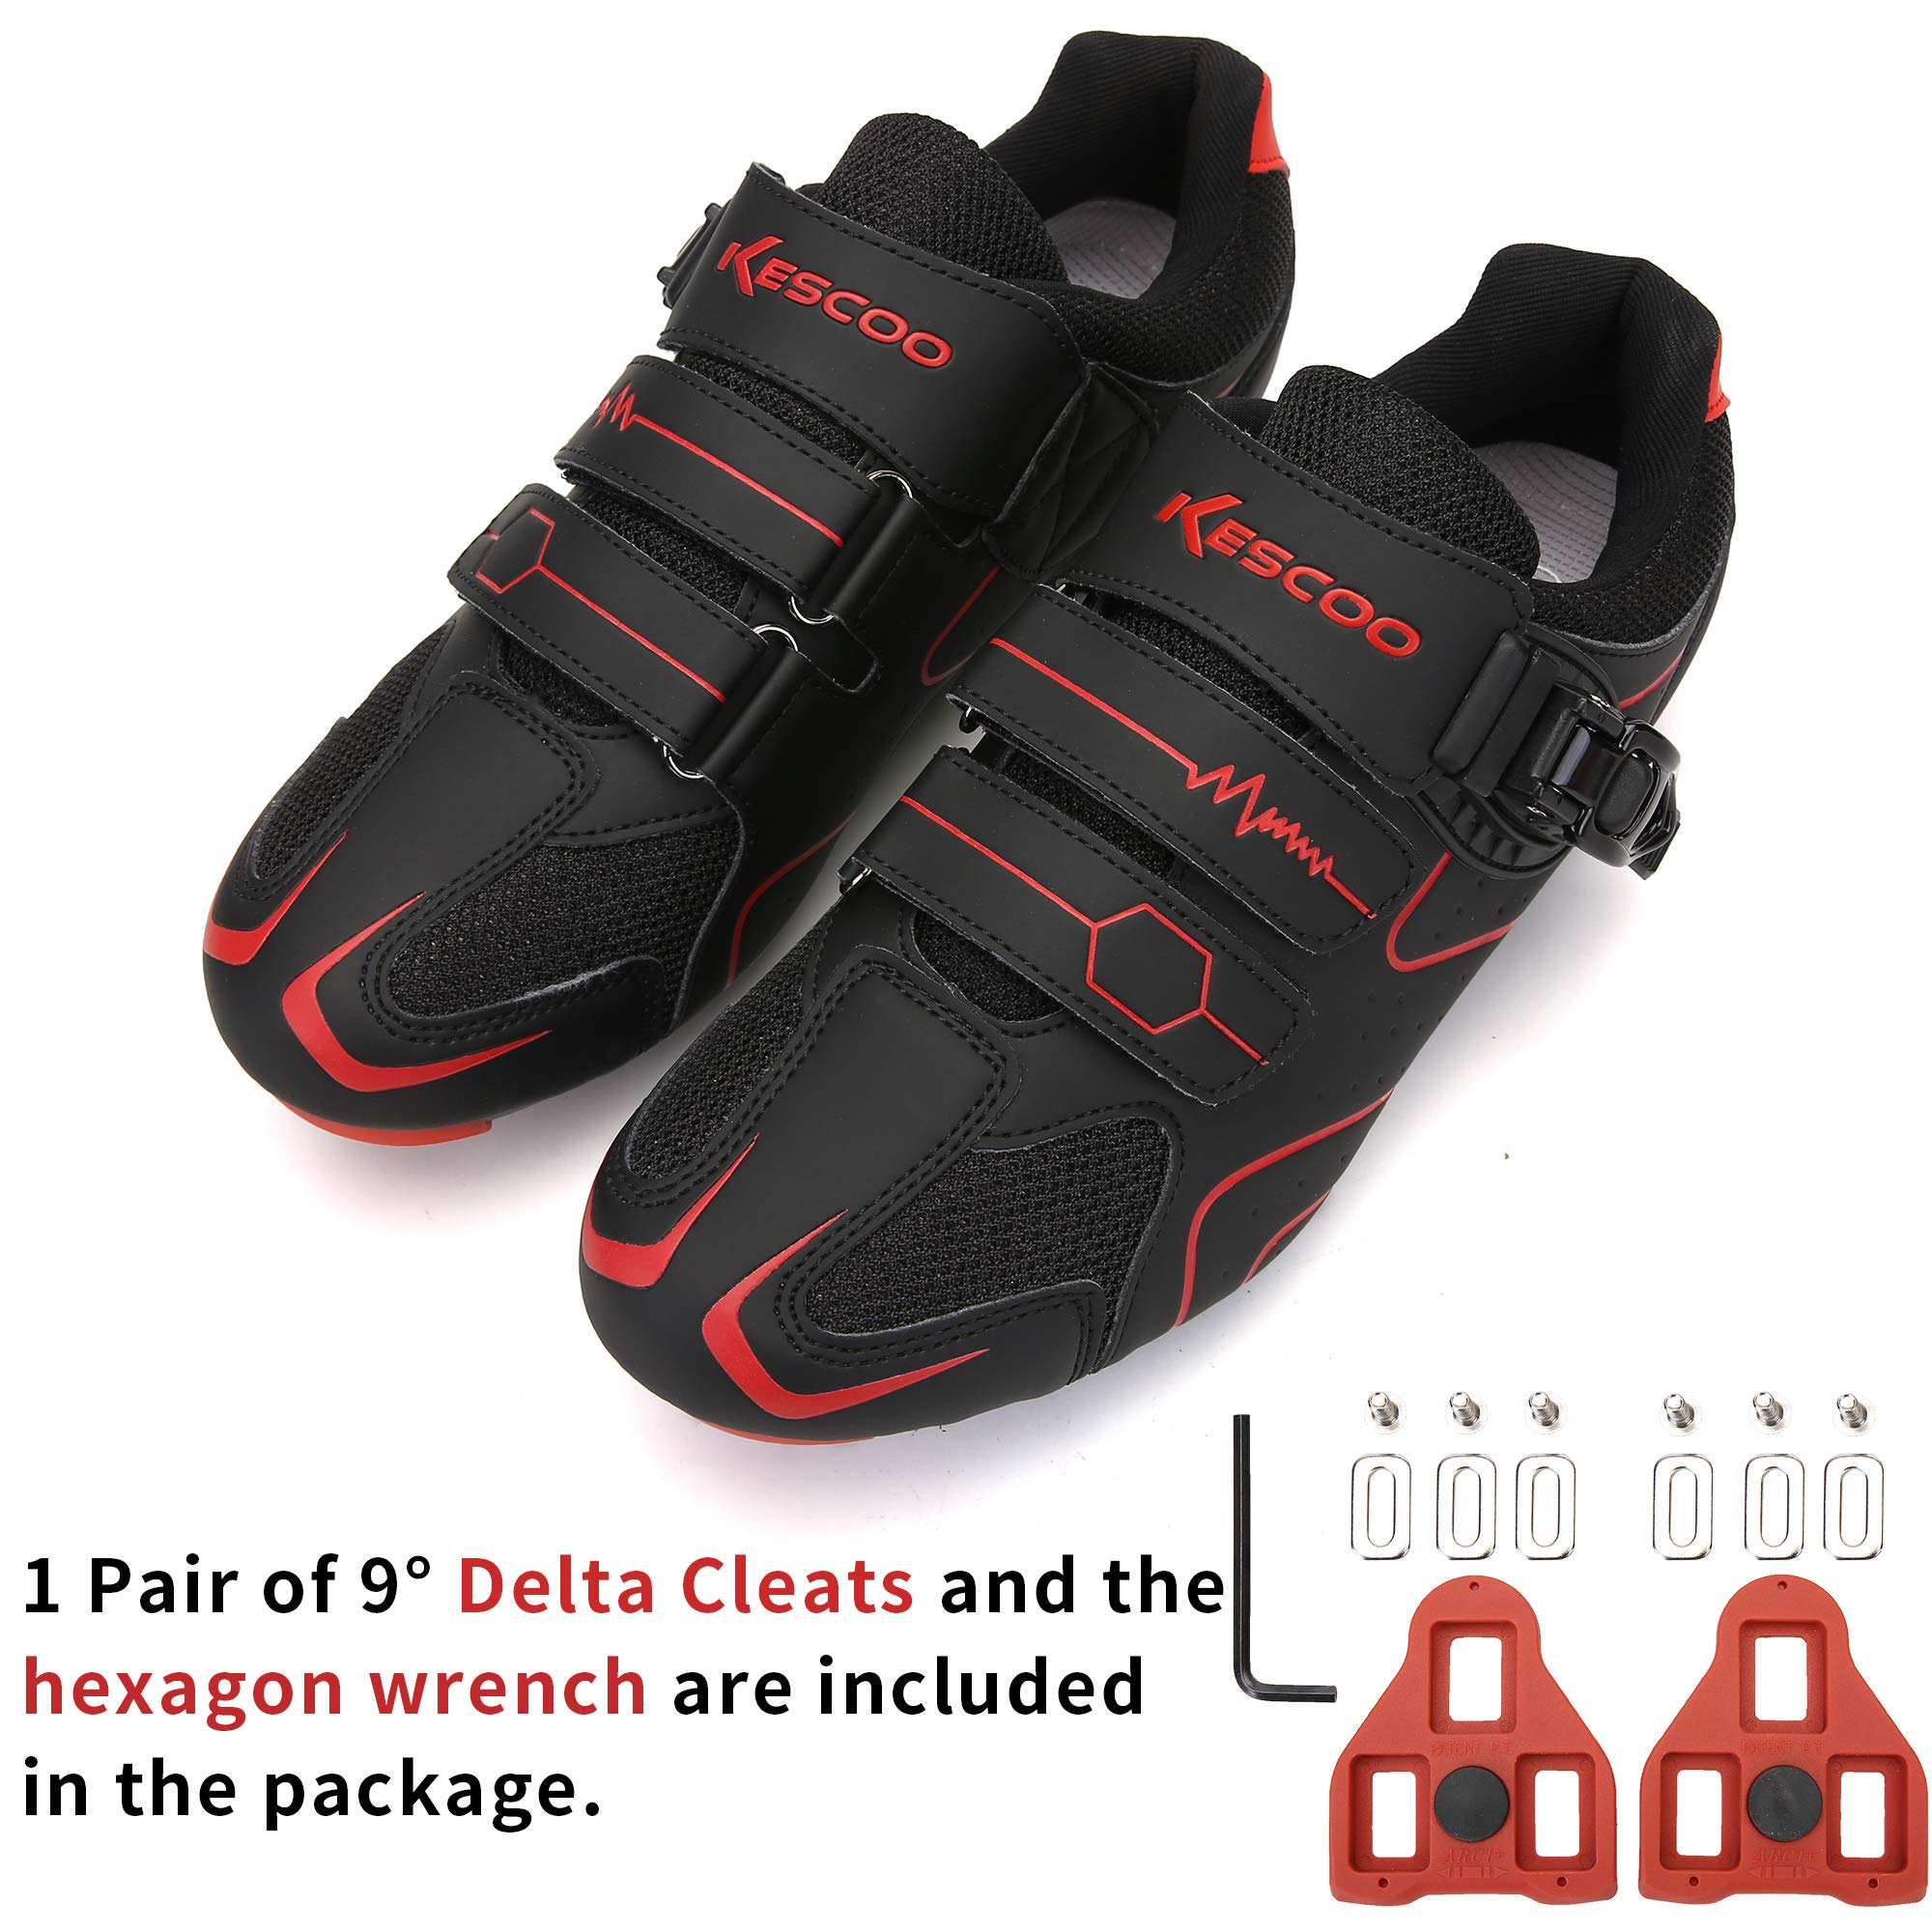 Unisex Cycling Shoes Compatible with pelaton Indoor Road Bike Shoes Riding Shoes for Men and Women Delta Cleats Clip Outdoor Pedal (Black-red, M13)